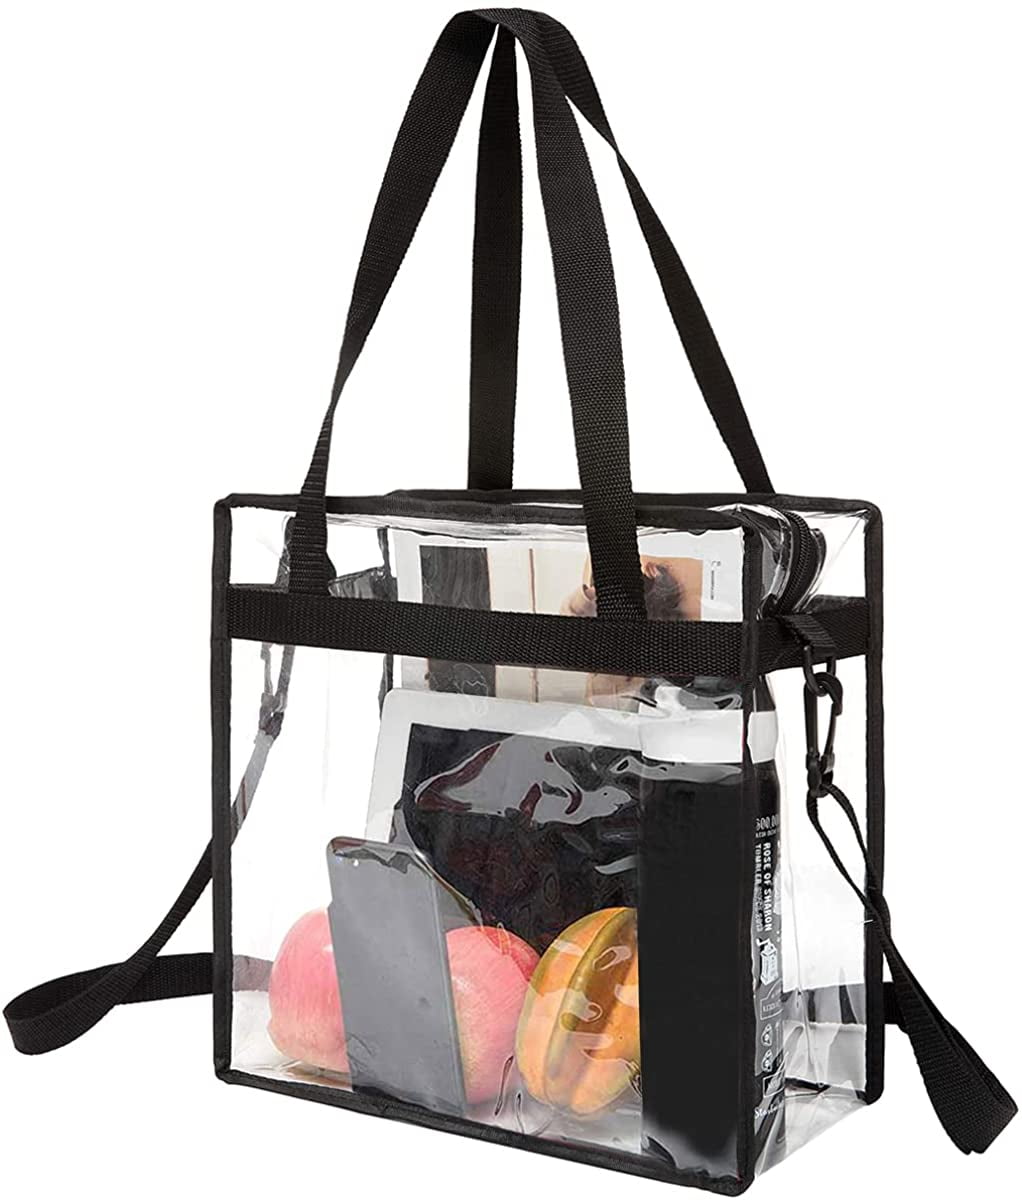 Clear PVC Tote Bag, Stadium Approved Tote with Zipper (19 x 6 x 13 Inc -  Zodaca